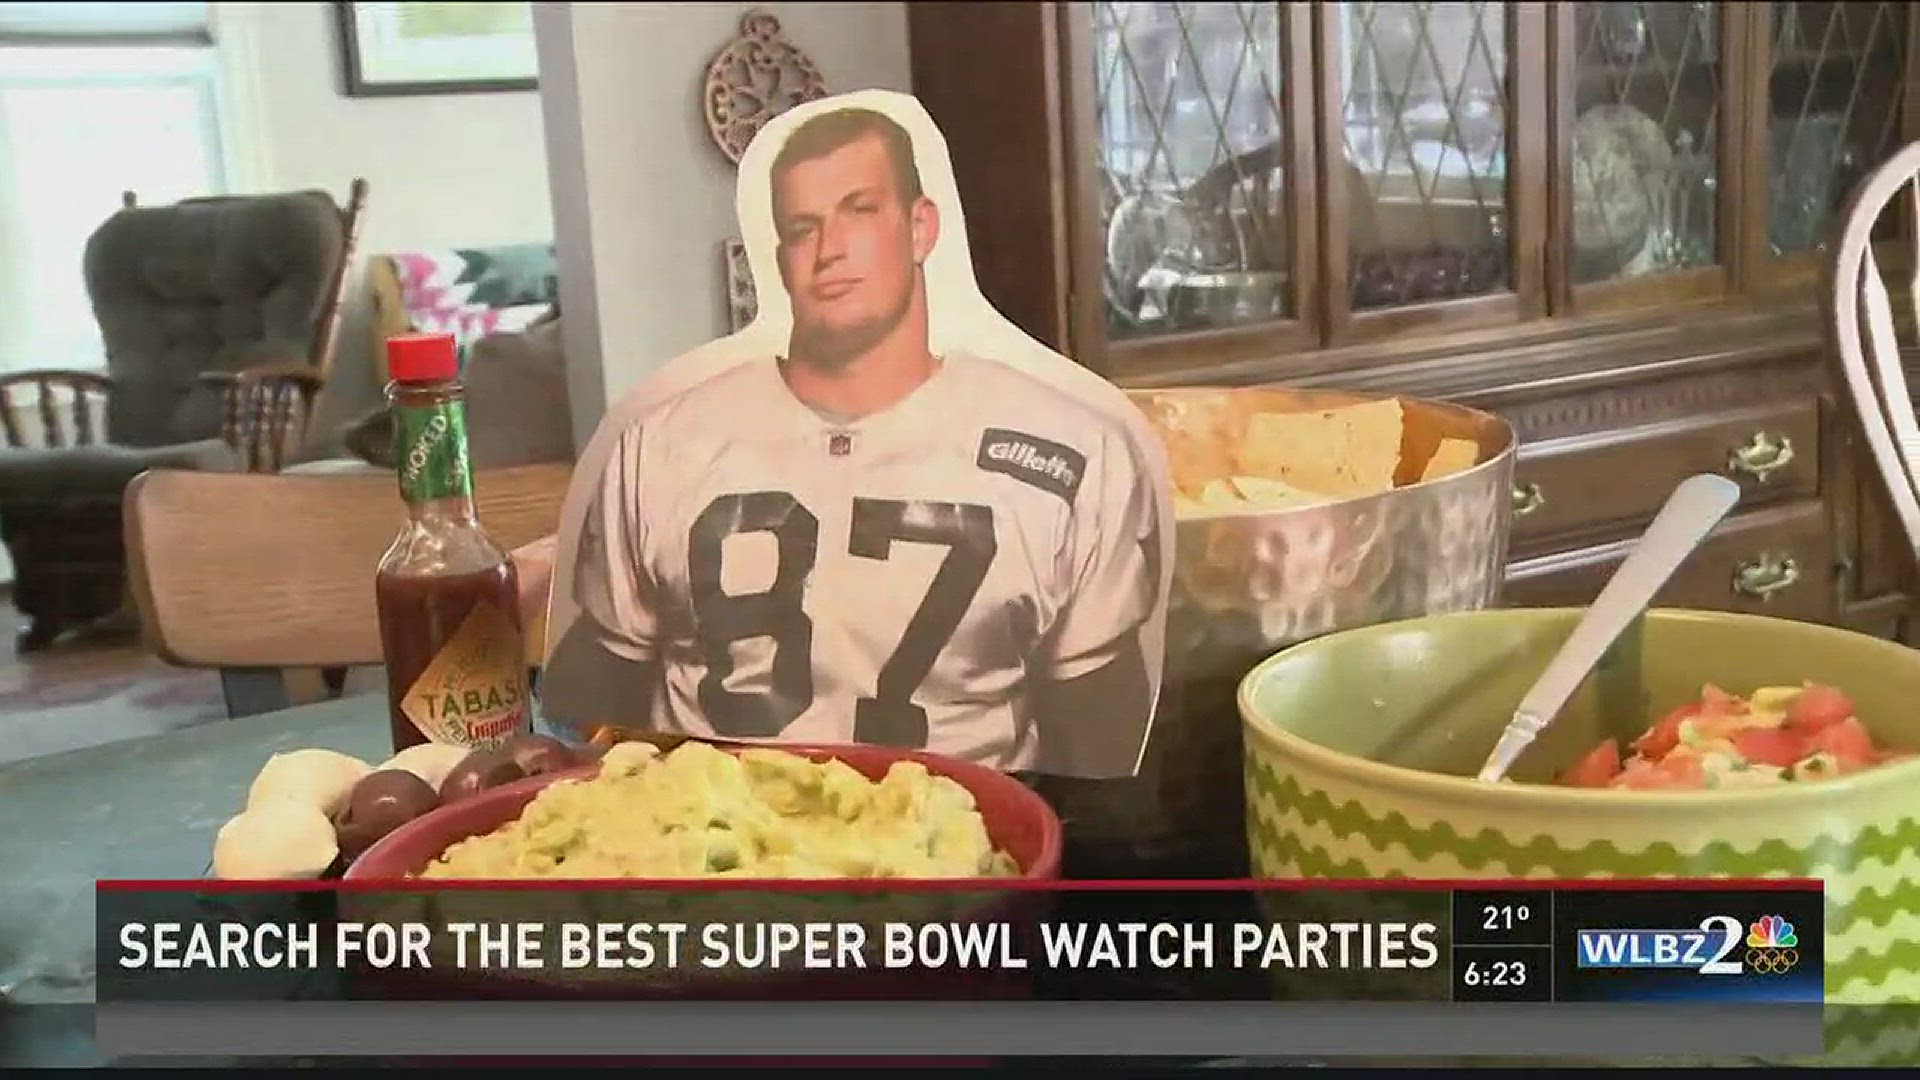 Why do you have the best Super Bowl watch party?